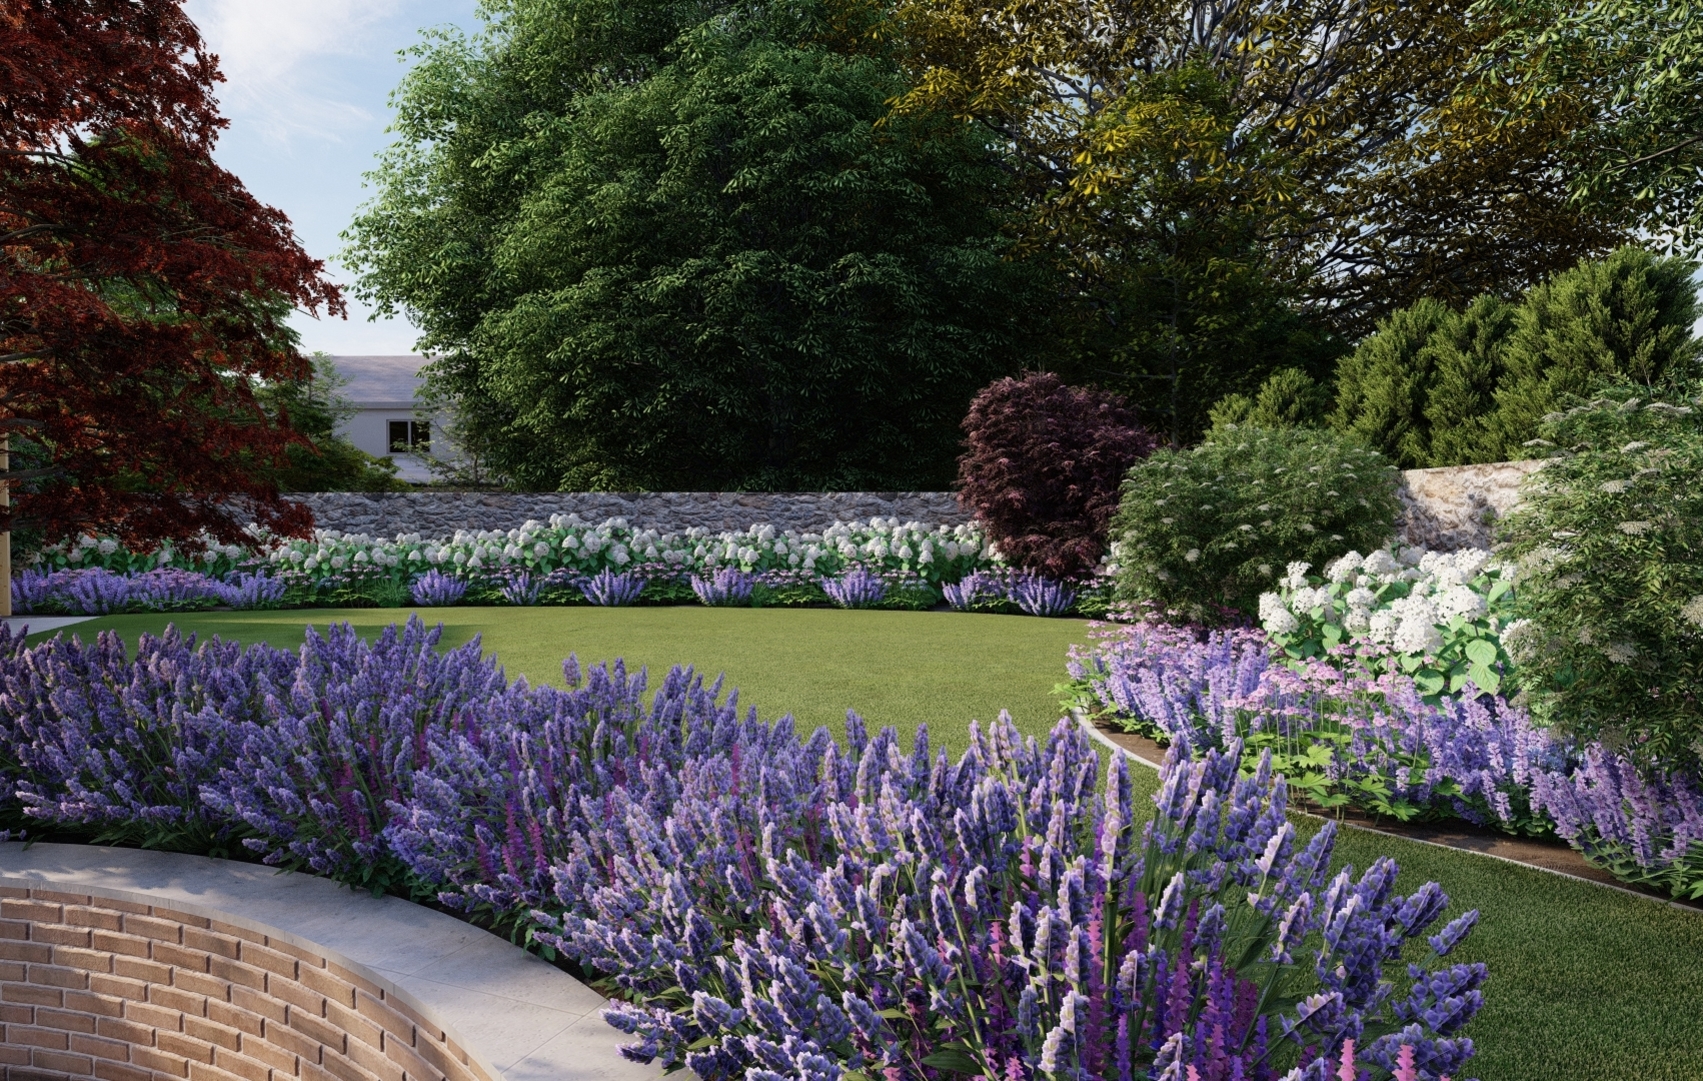 Generous planting beds combine to create beautifully sweeping planted border areas